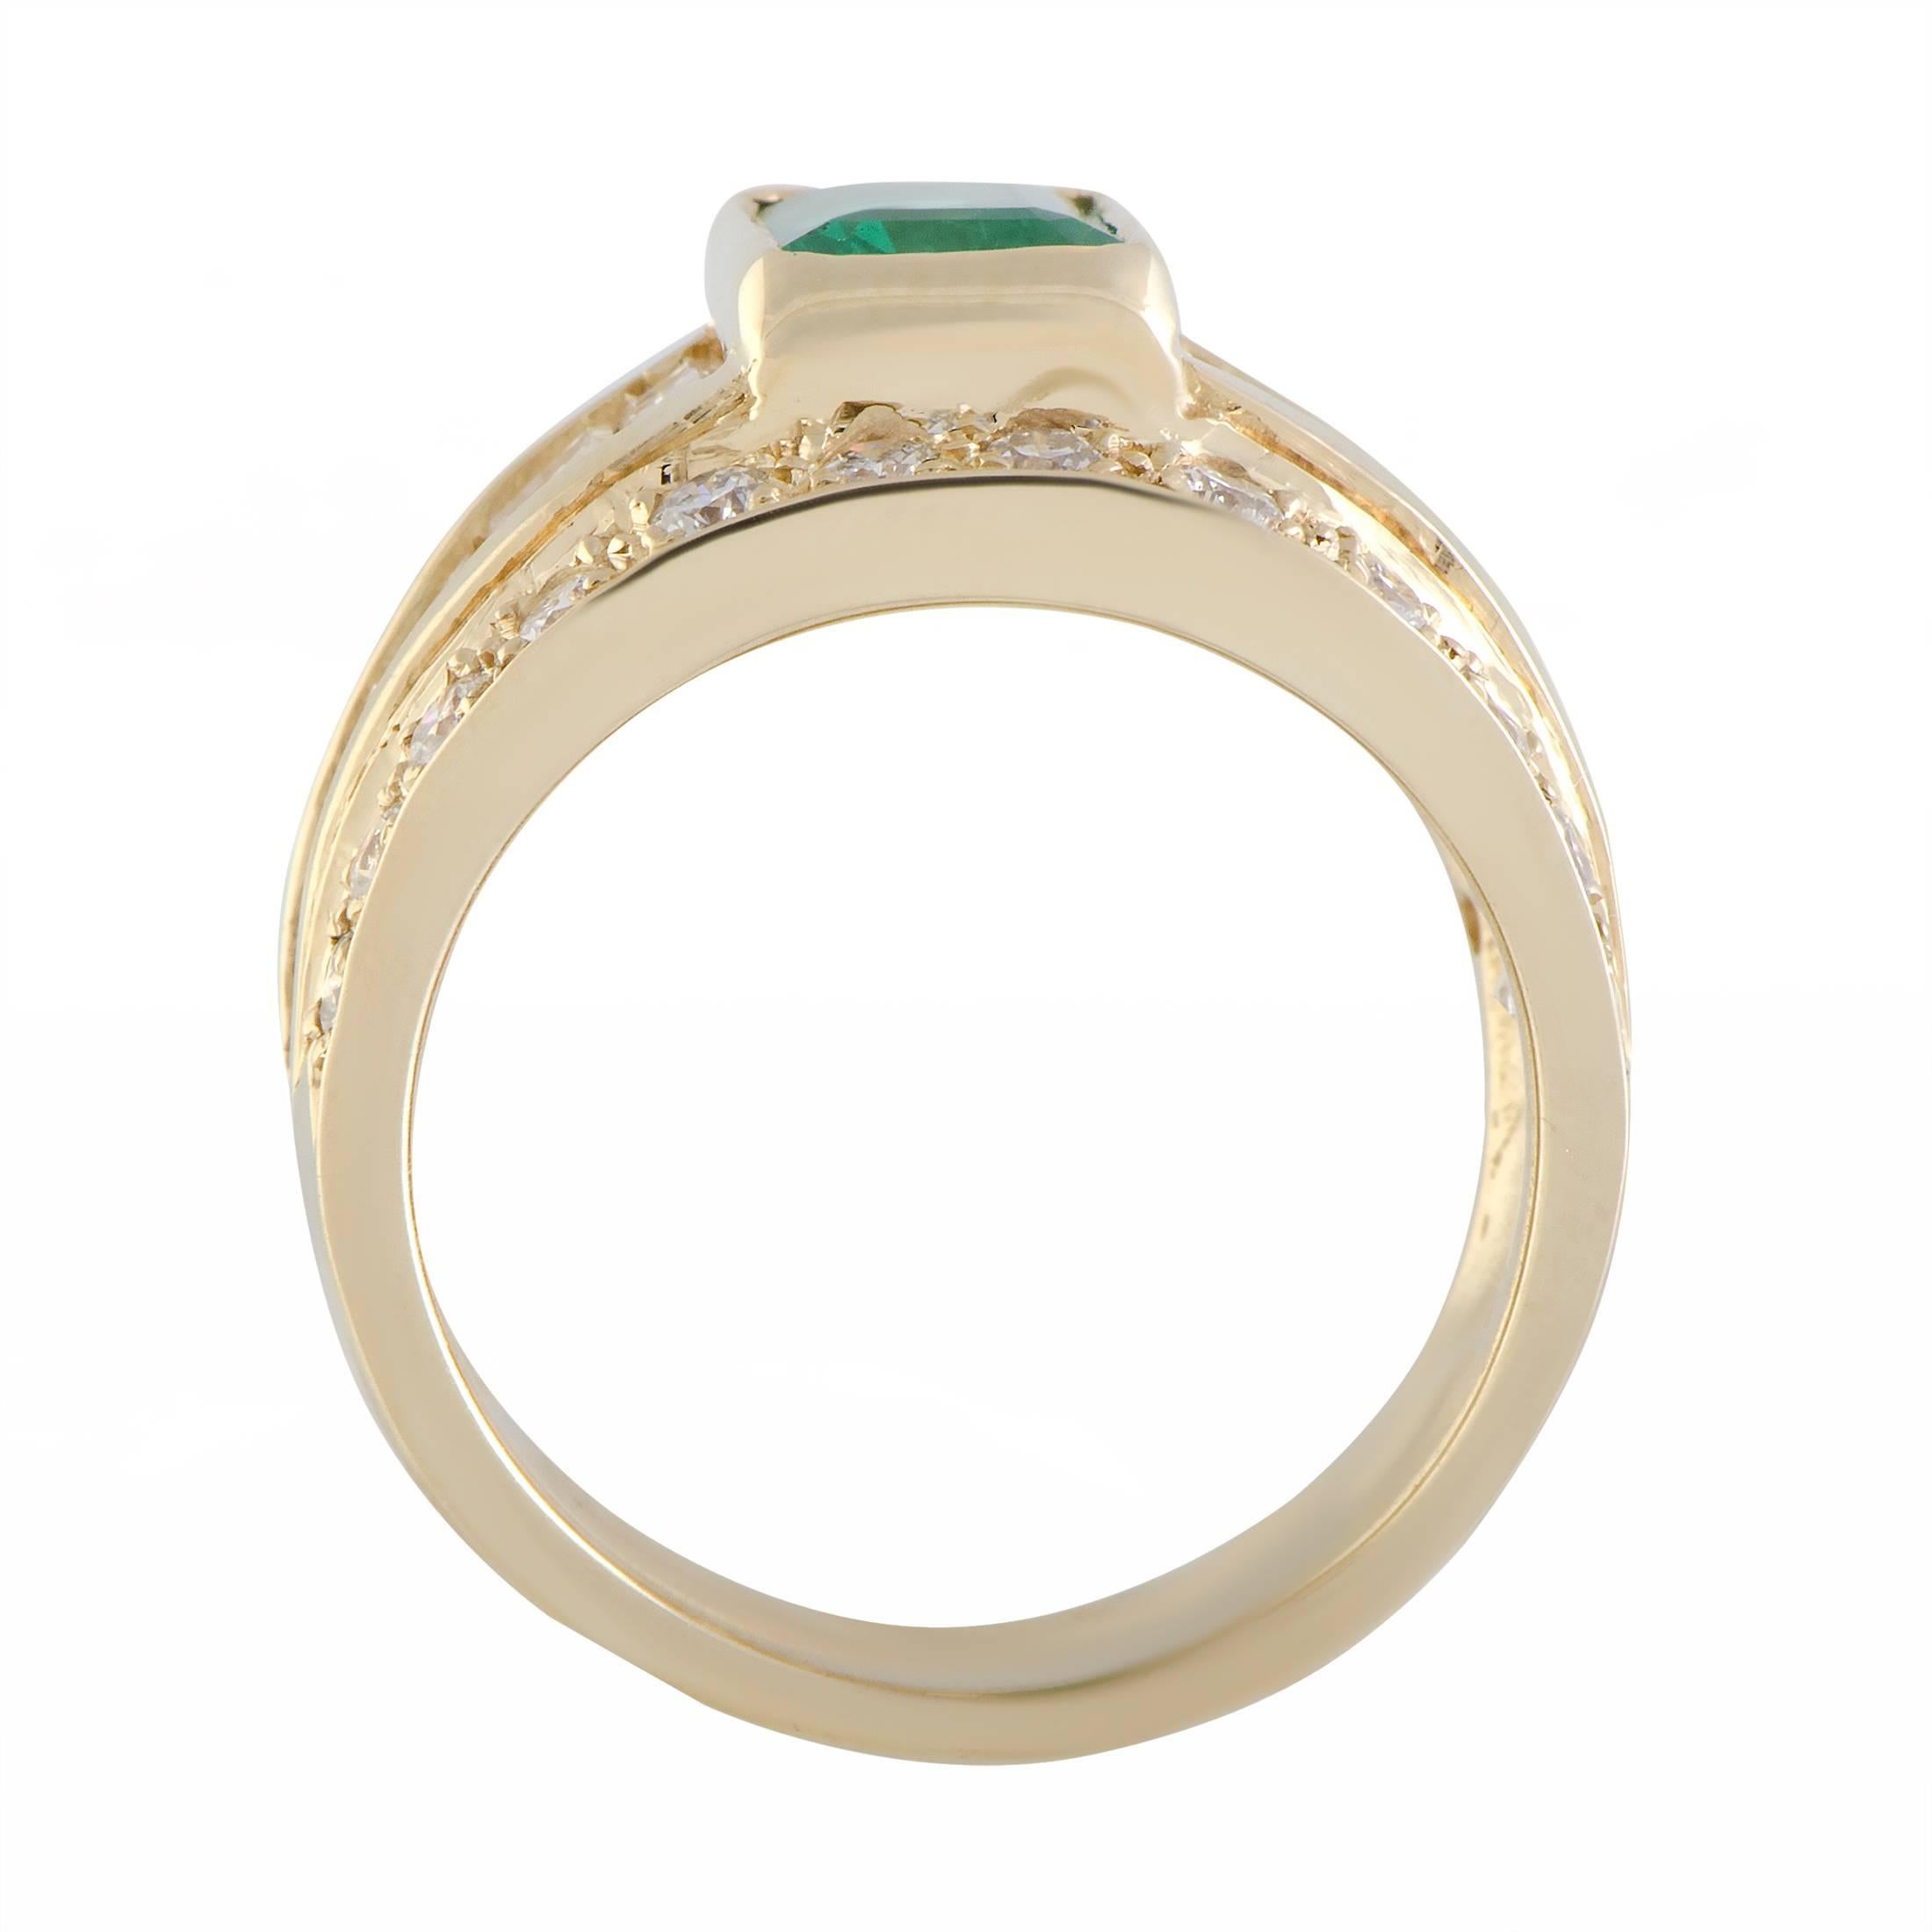 Prestige and extravagance are entwined in this exceptional ring that is made of 14K yellow gold and decorated with a luxurious blend of emerald and diamond stones. The emerald weighs 1.85 carats and the diamonds total approximately 1.75 carats.
Ring